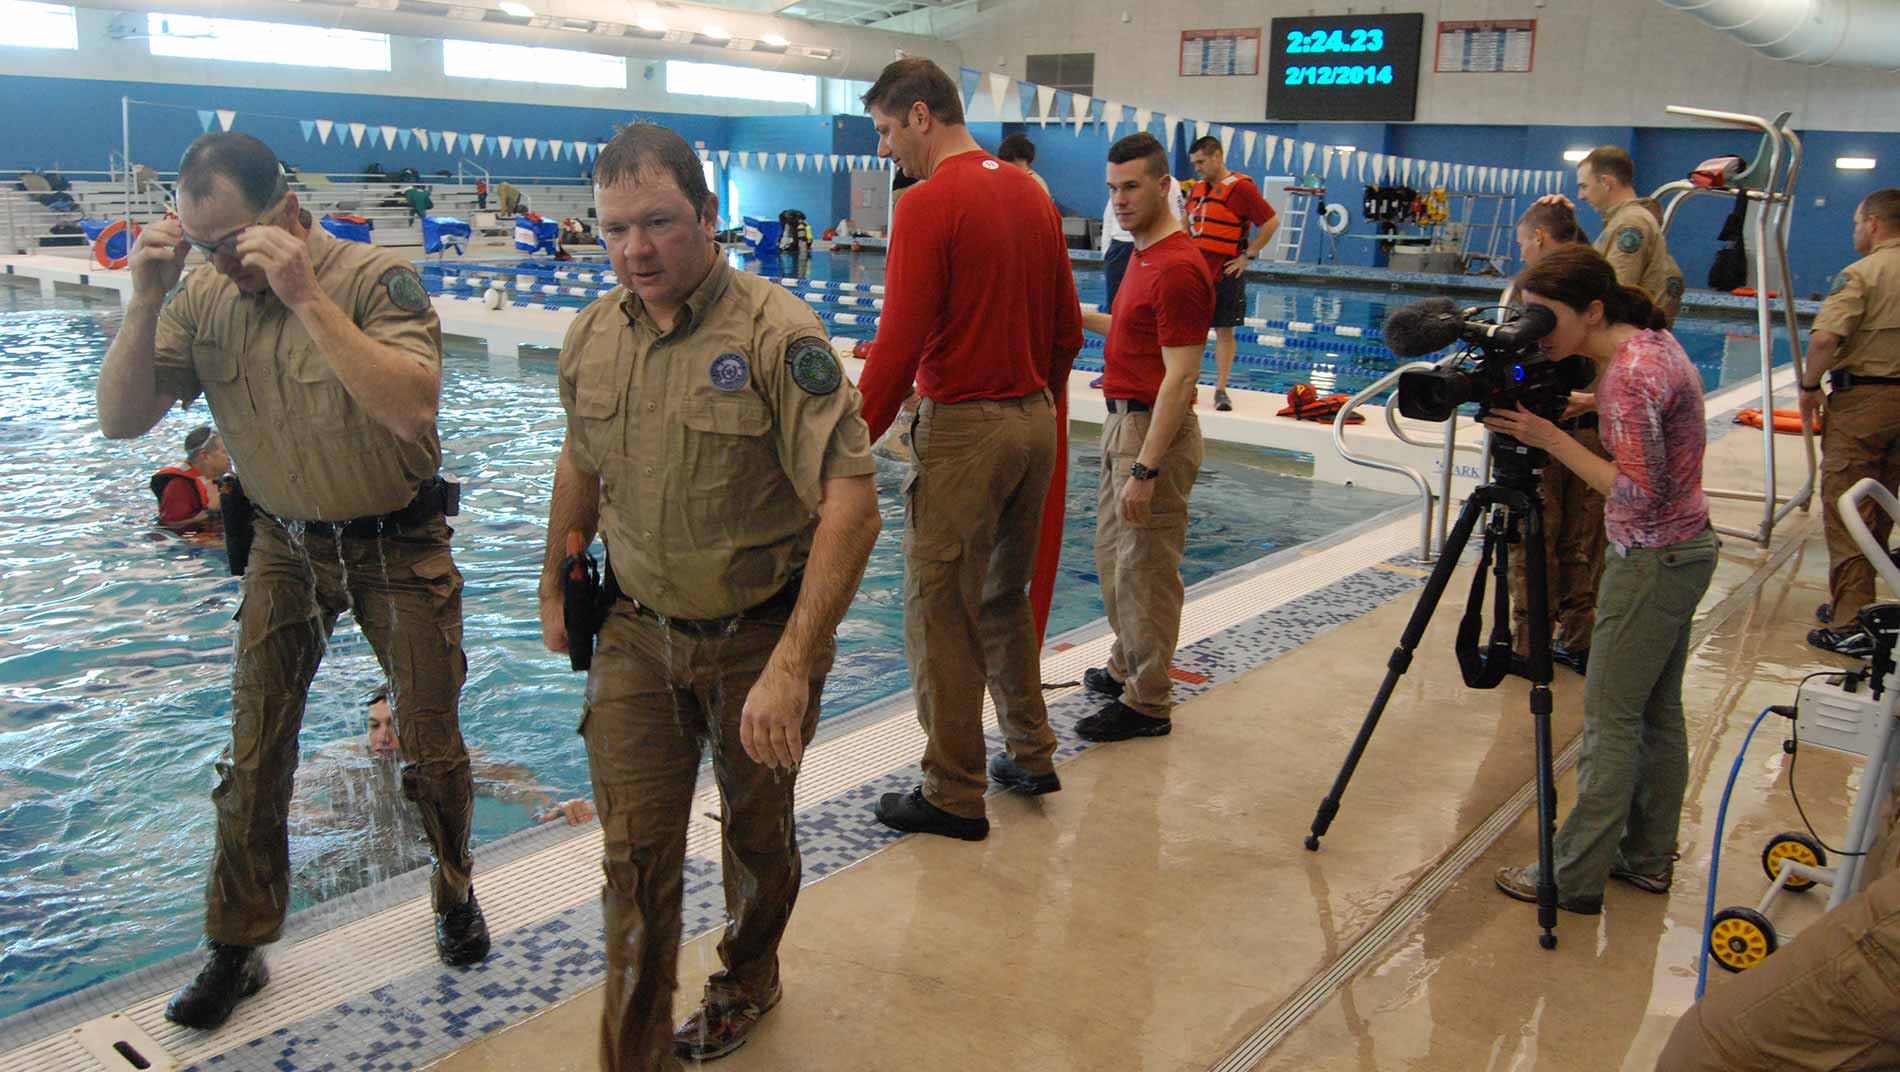 Whitney Bishop videotapes wet wardens taking a water safety training course.